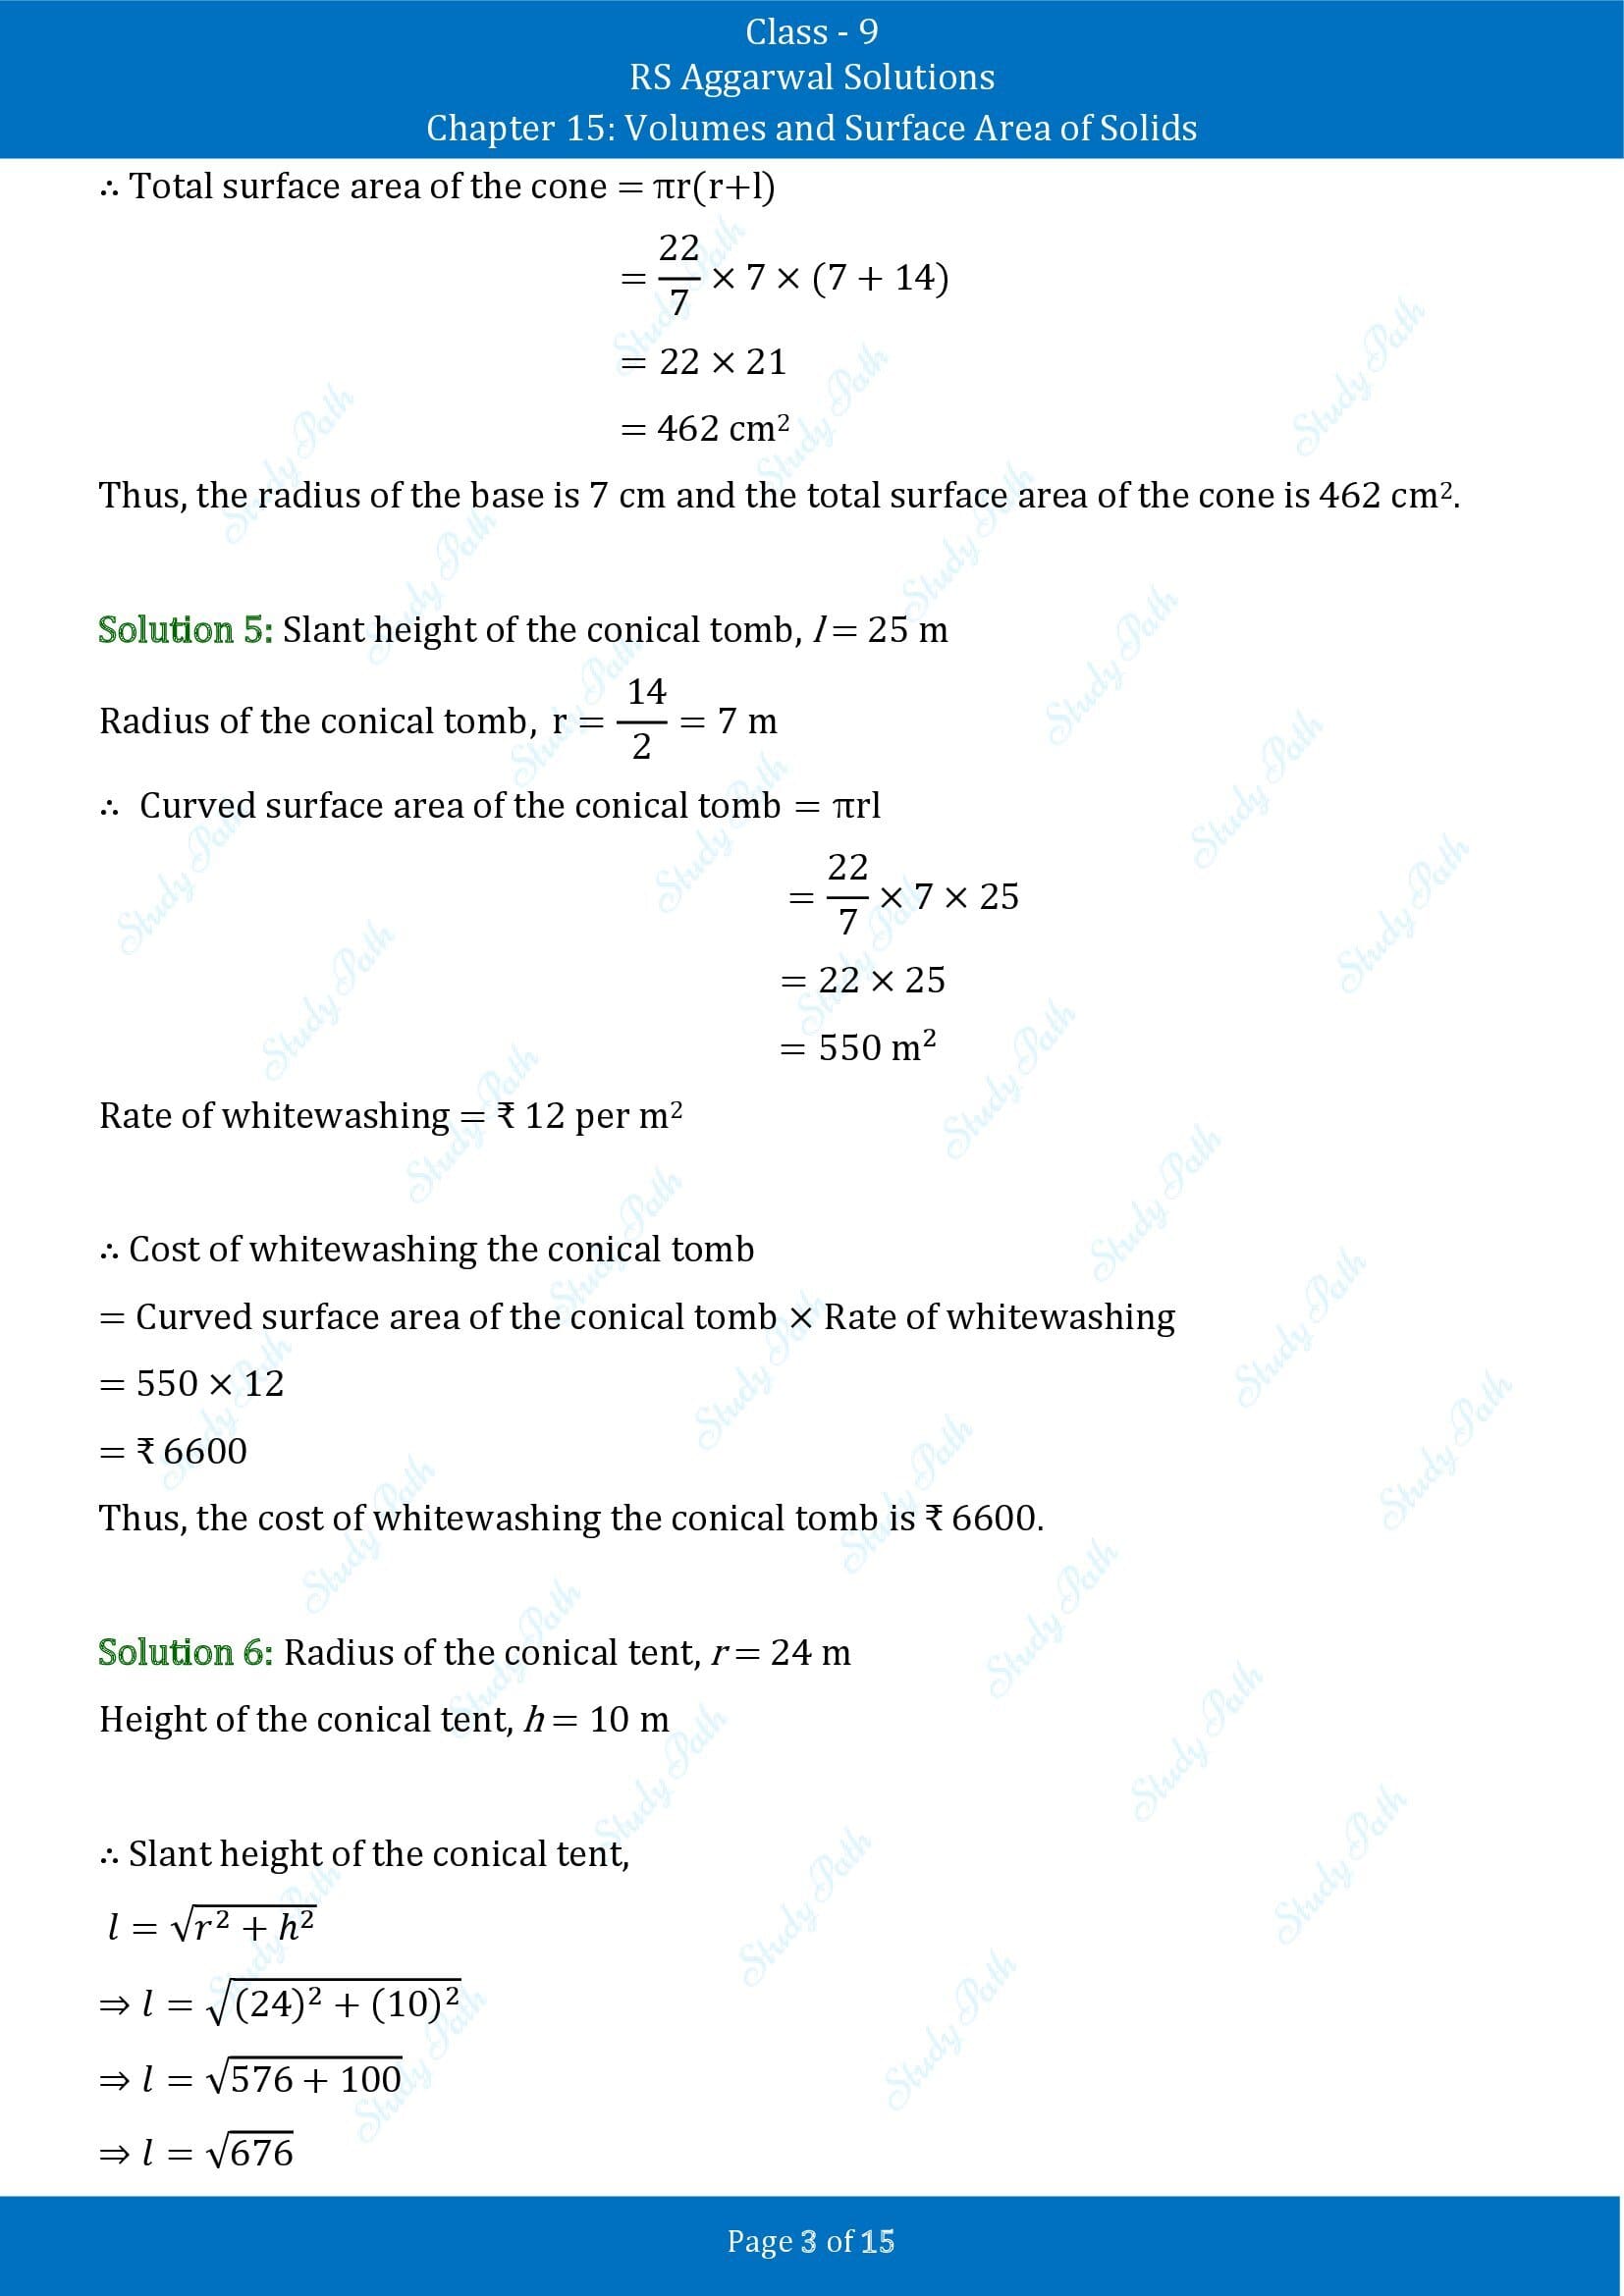 RS Aggarwal Solutions Class 9 Chapter 15 Volumes and Surface Area of Solids Exercise 15C 00003